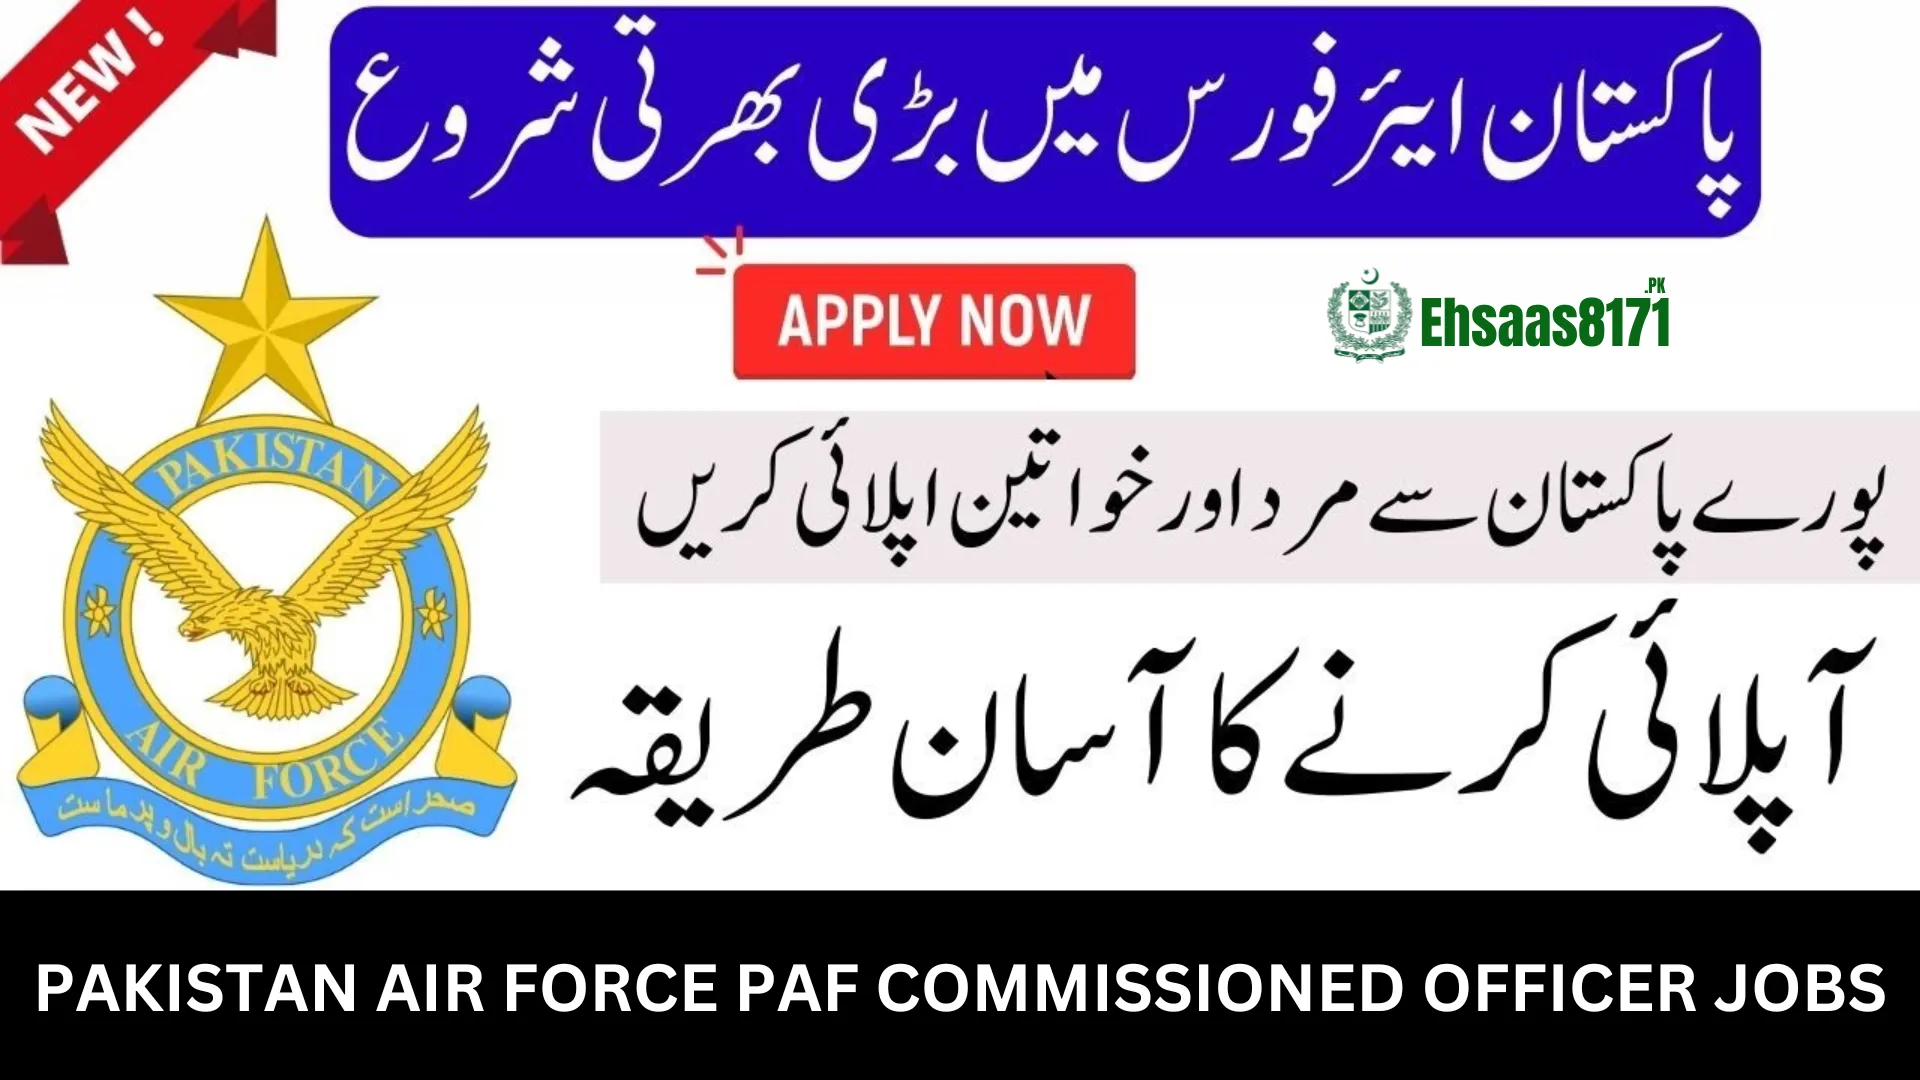 Pakistan Air Force PAF Commissioned Officer Jobs